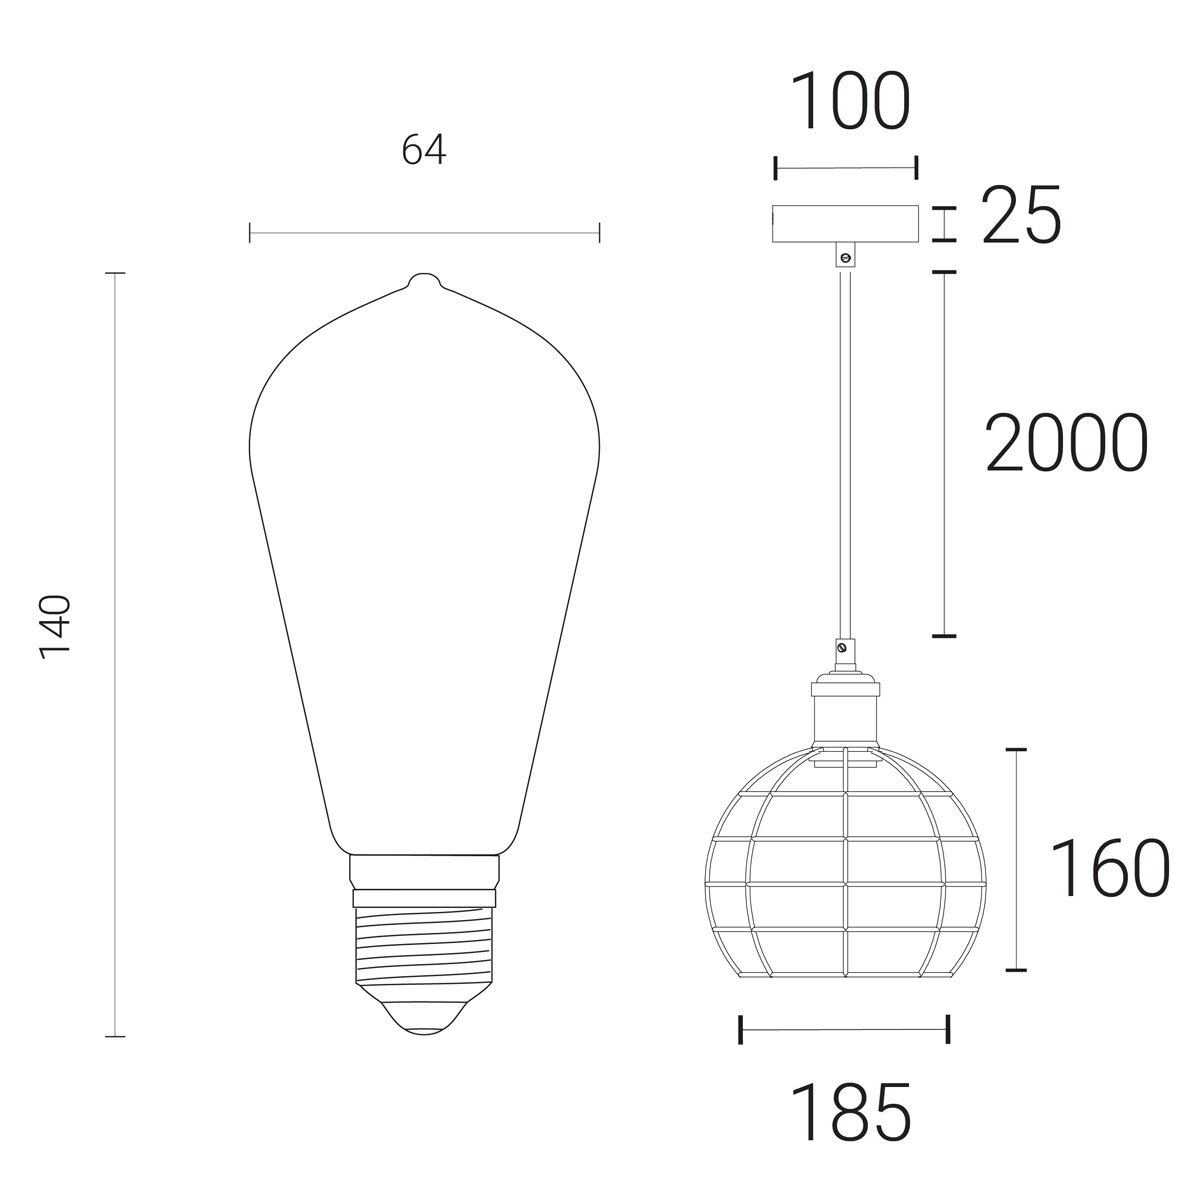 Line drawing of light on white background with dimensions